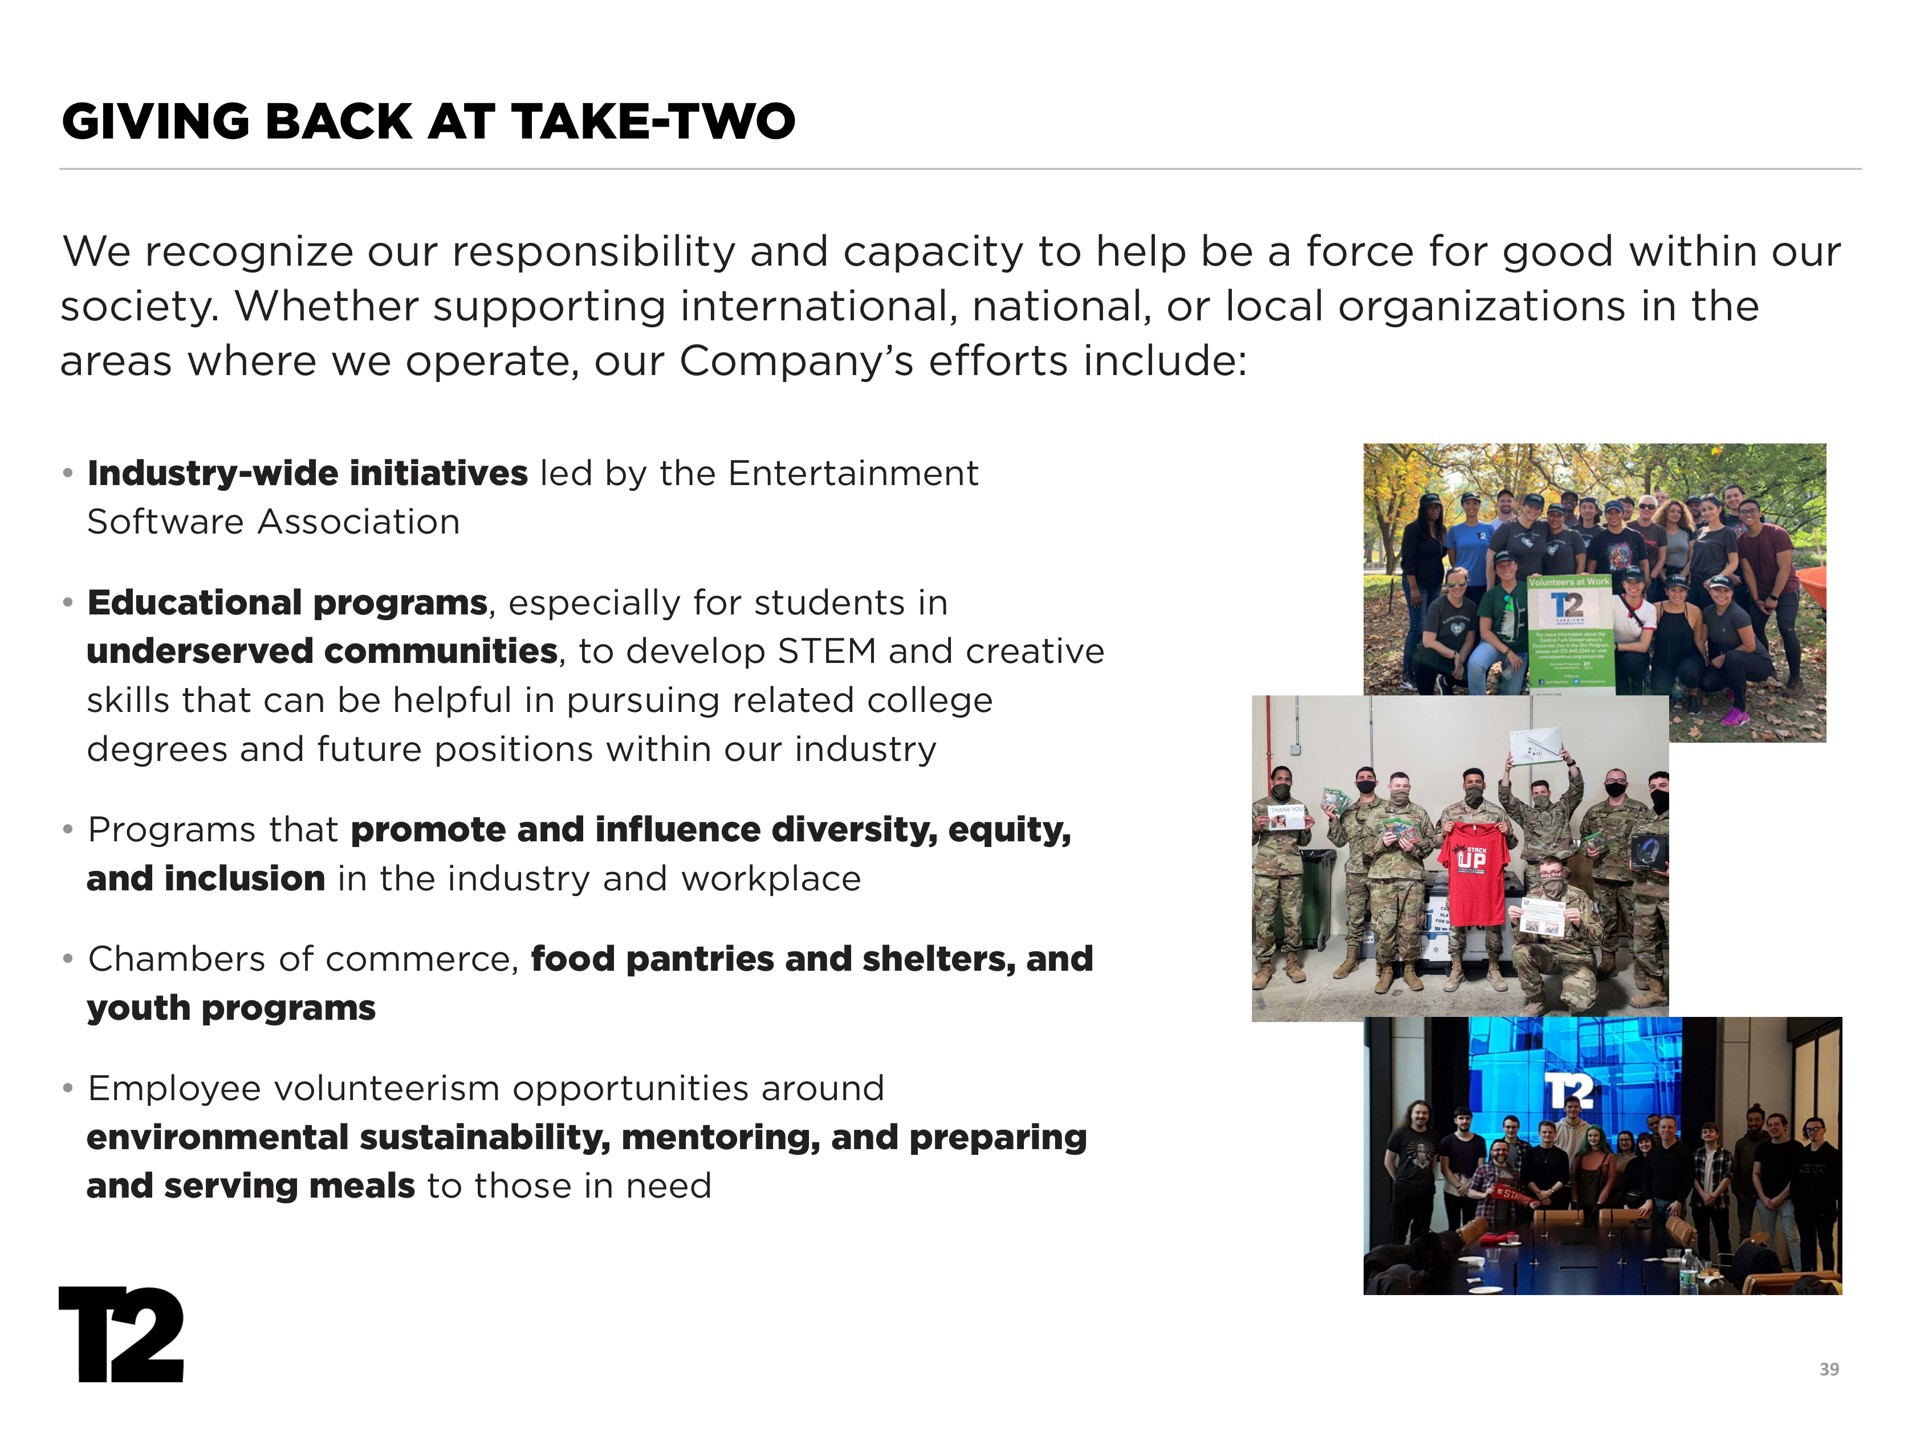 giving back at take two we recognize our responsibility and capacity to help be a force for good within our society whether supporting international national or local organizations in the areas where we operate our company efforts include | Take-Two Interactive